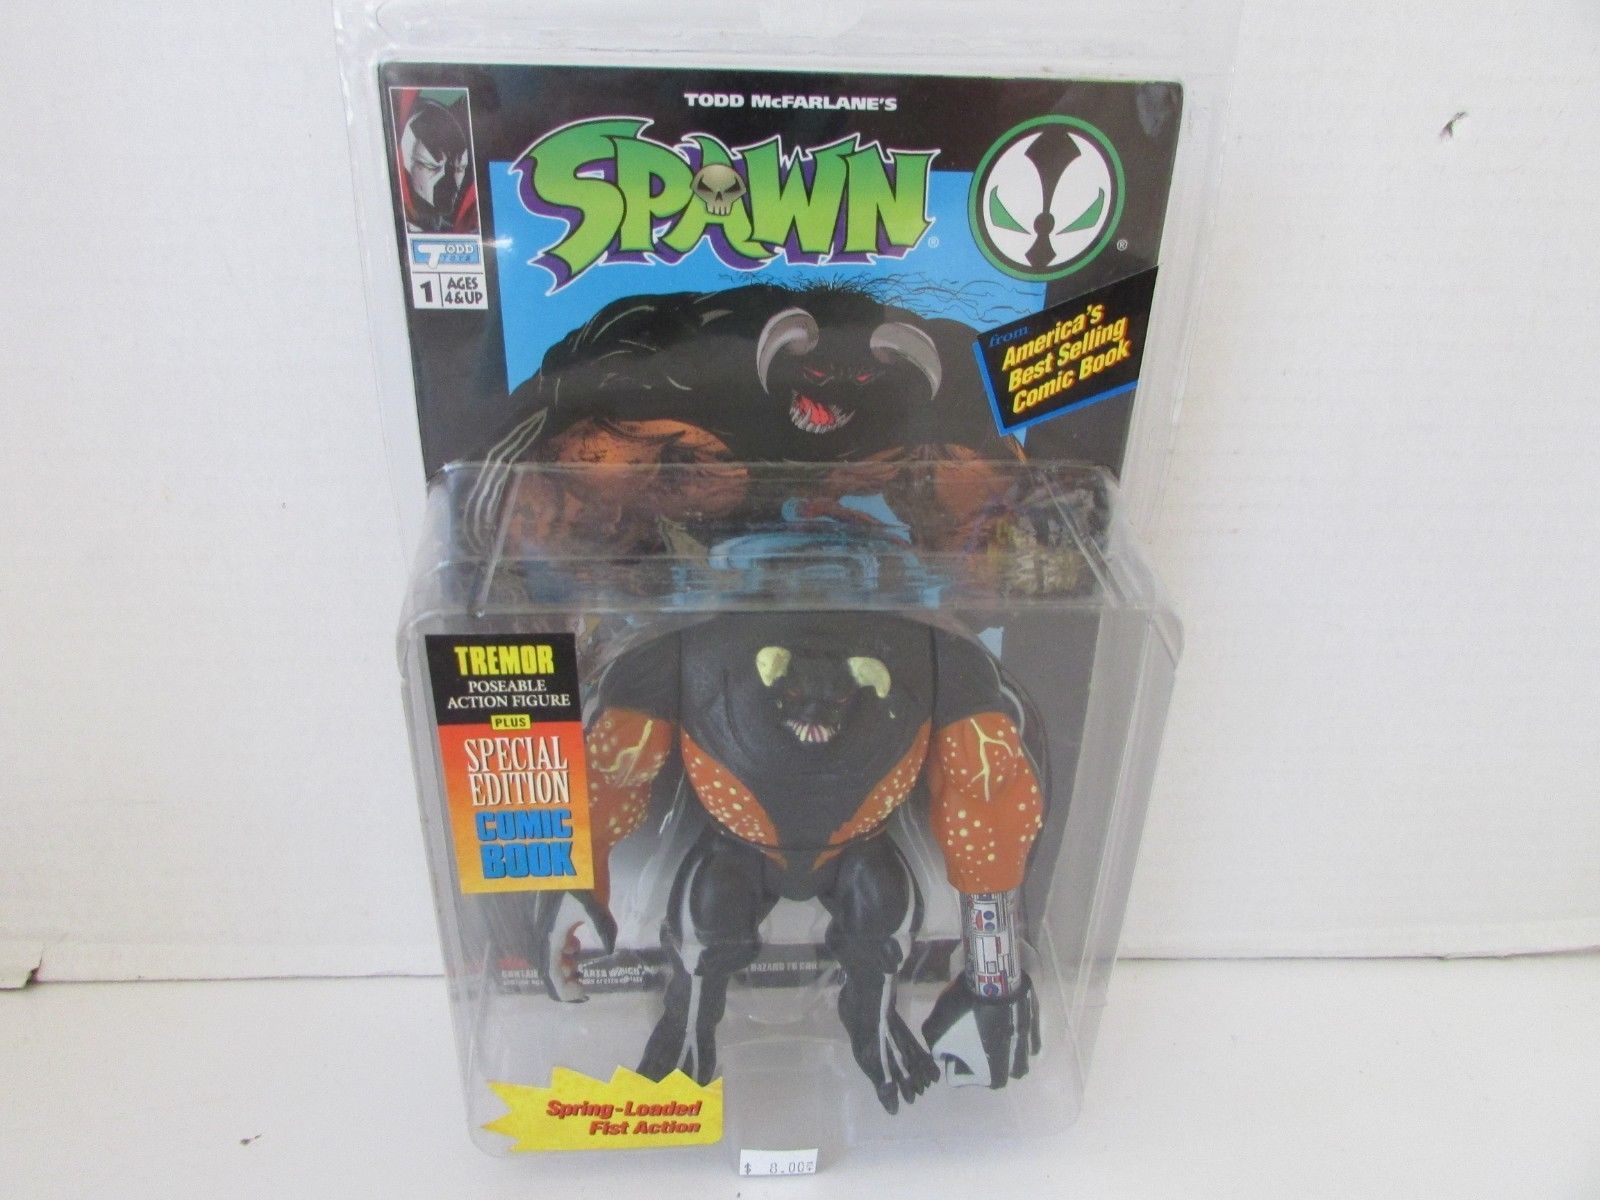 Primary image for MCFARLANE TOYS SPAWN TREMOR POSEABLE ACTION FIGURE 5"  L130